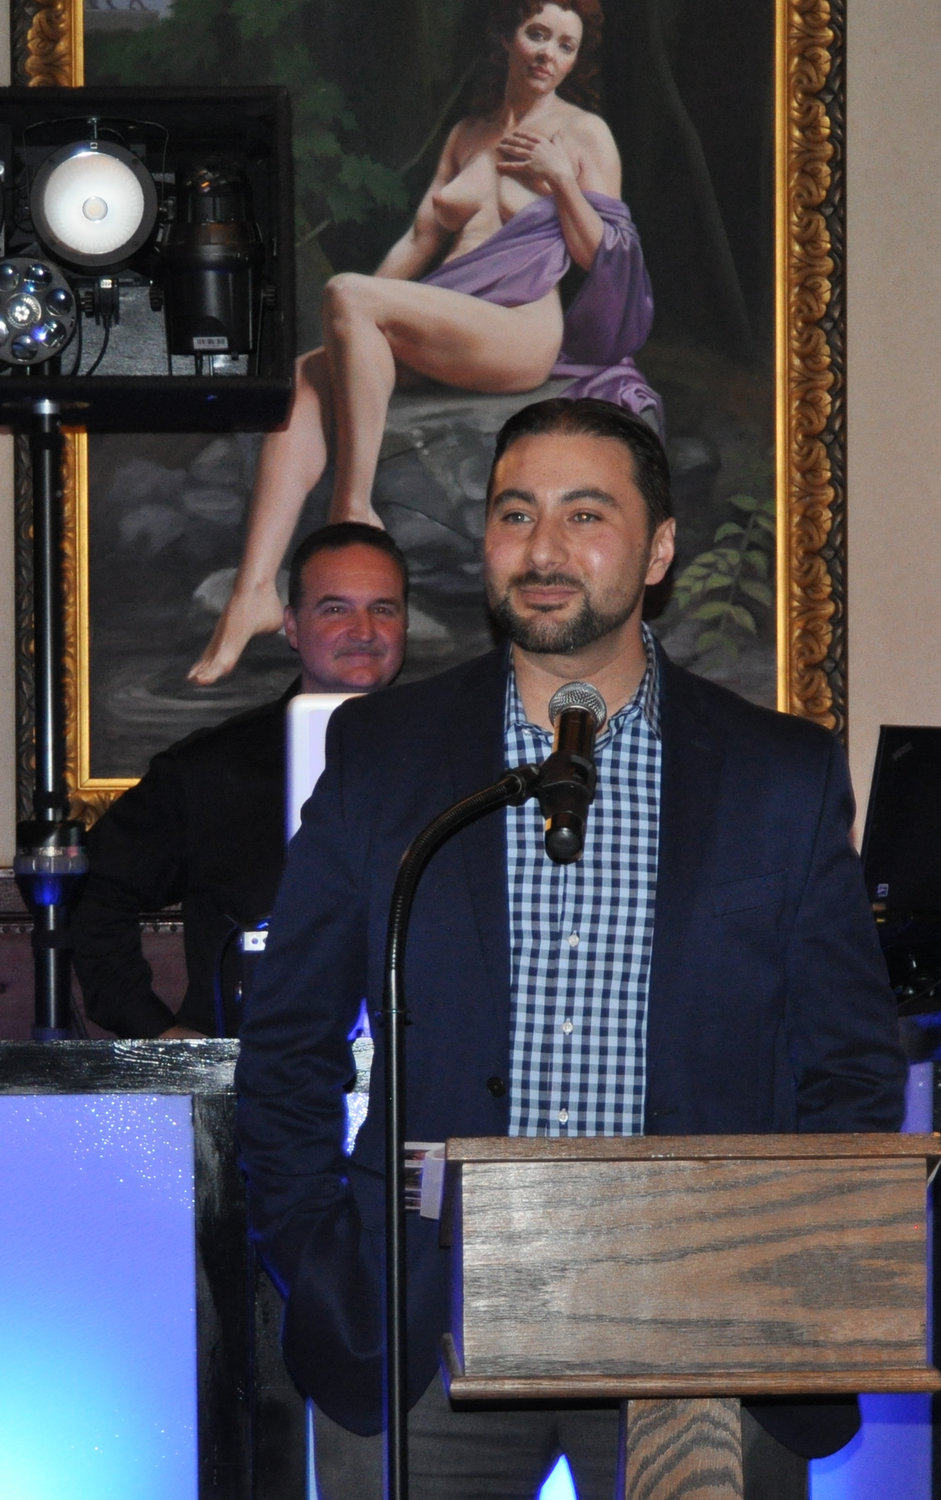 Former Eldred High School graduate Dan Paradiso, who now serves as the director of sales and marketing for the Kartrite Resort & Indoor Waterpark, gave an inspiring speech at the Greater Barryville Chamber of Commerce Winter Warm-Up last weekend.